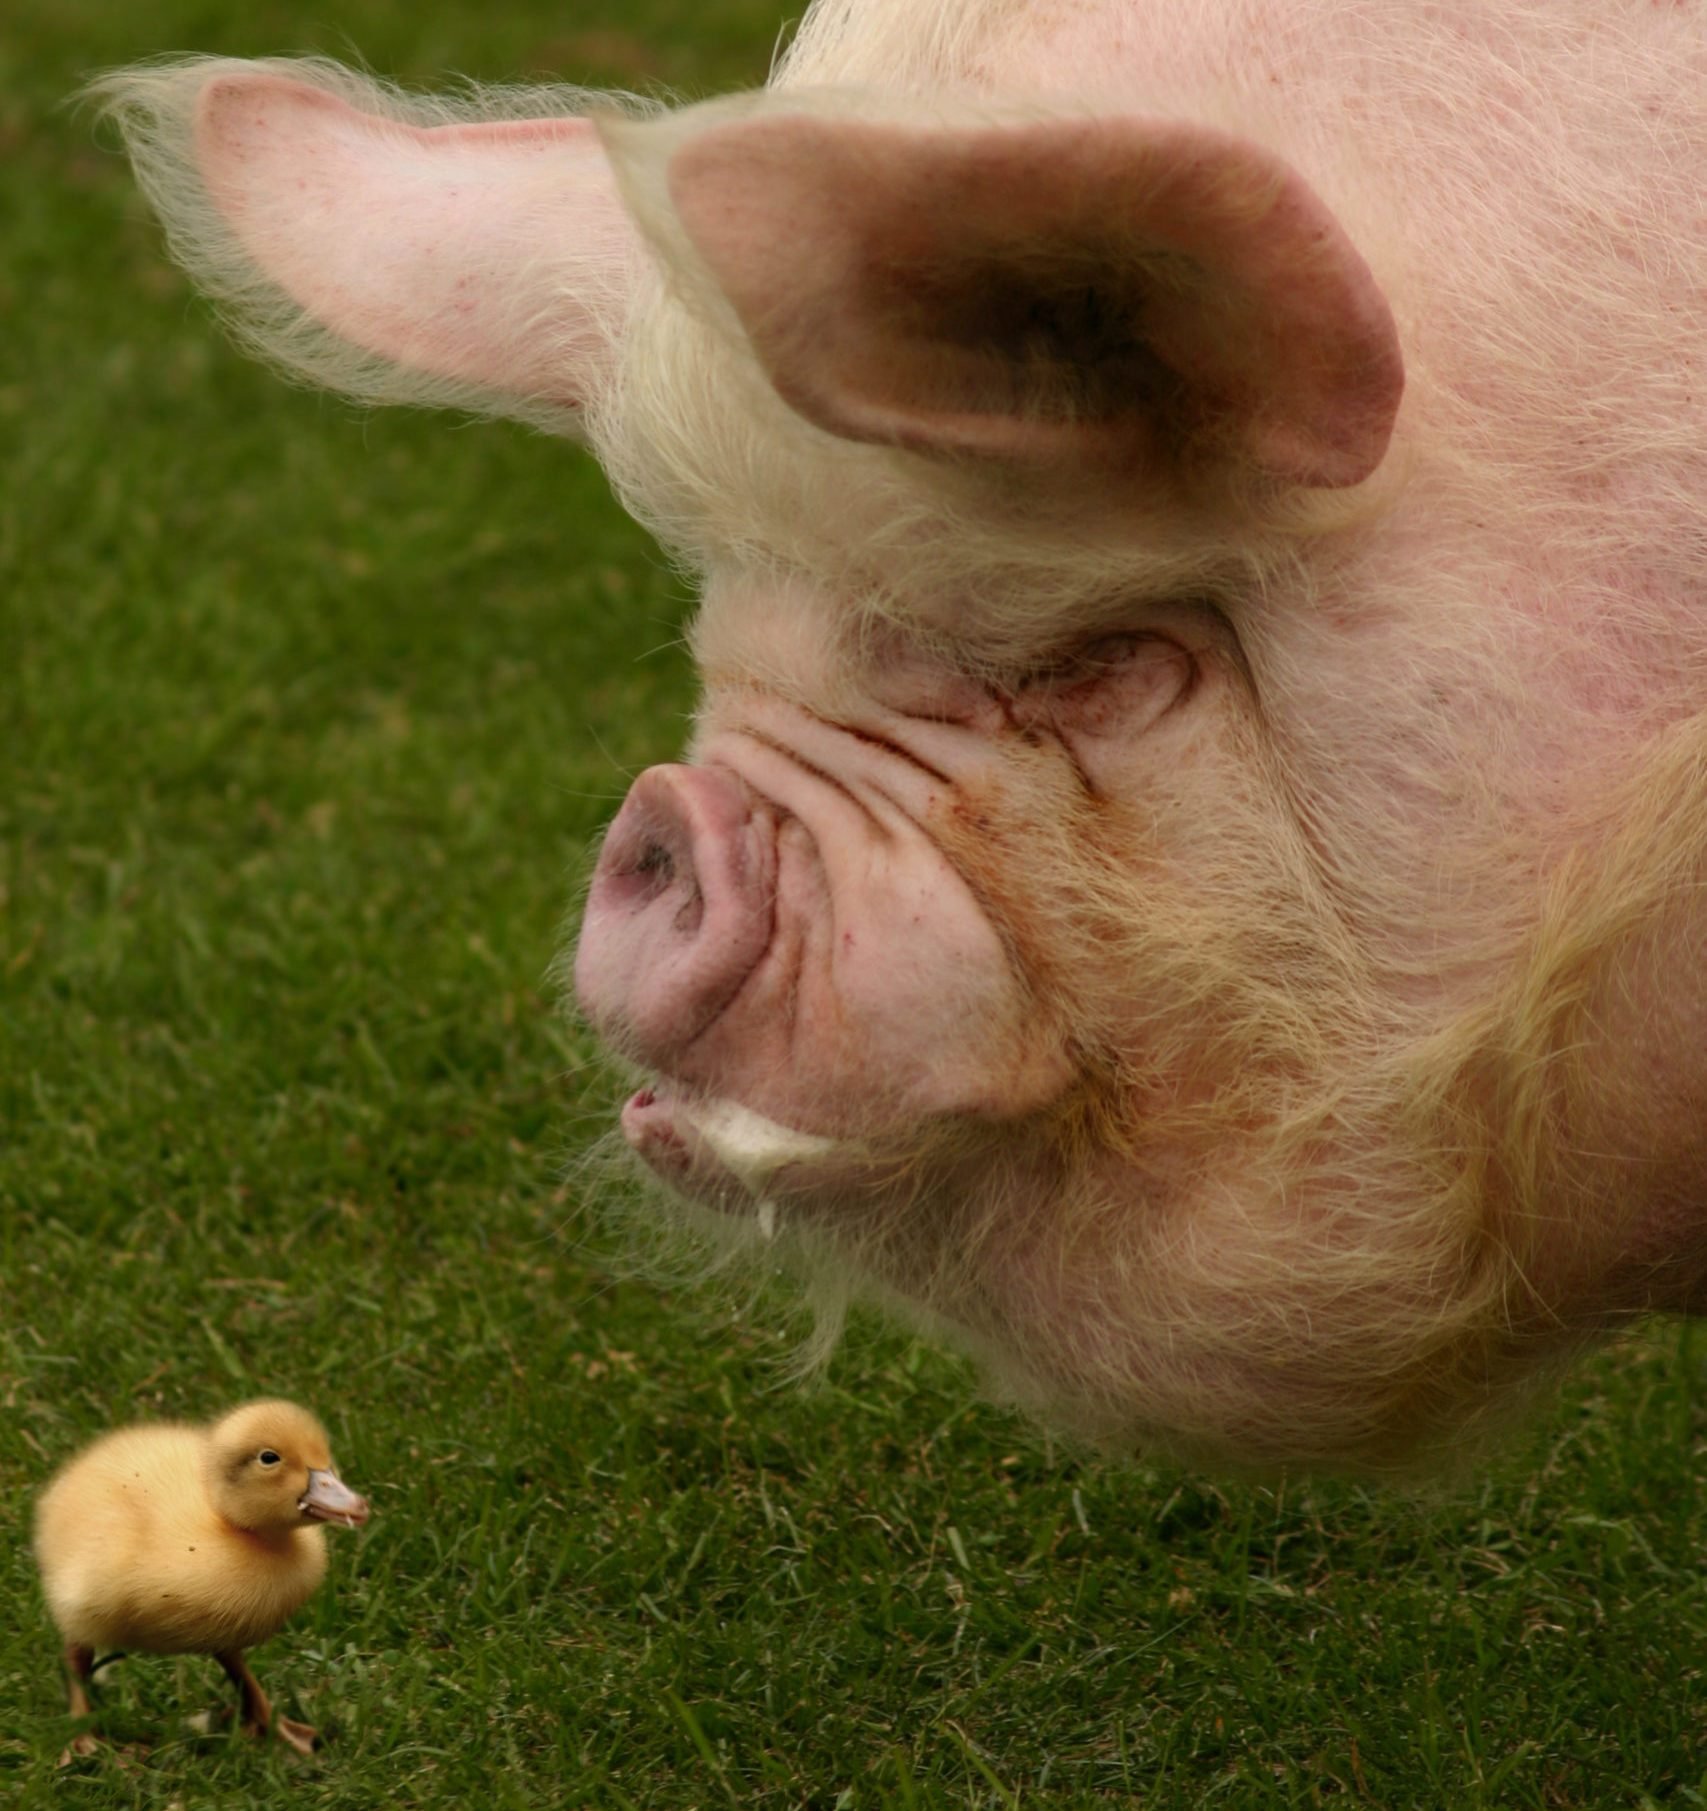 Pig and duckling